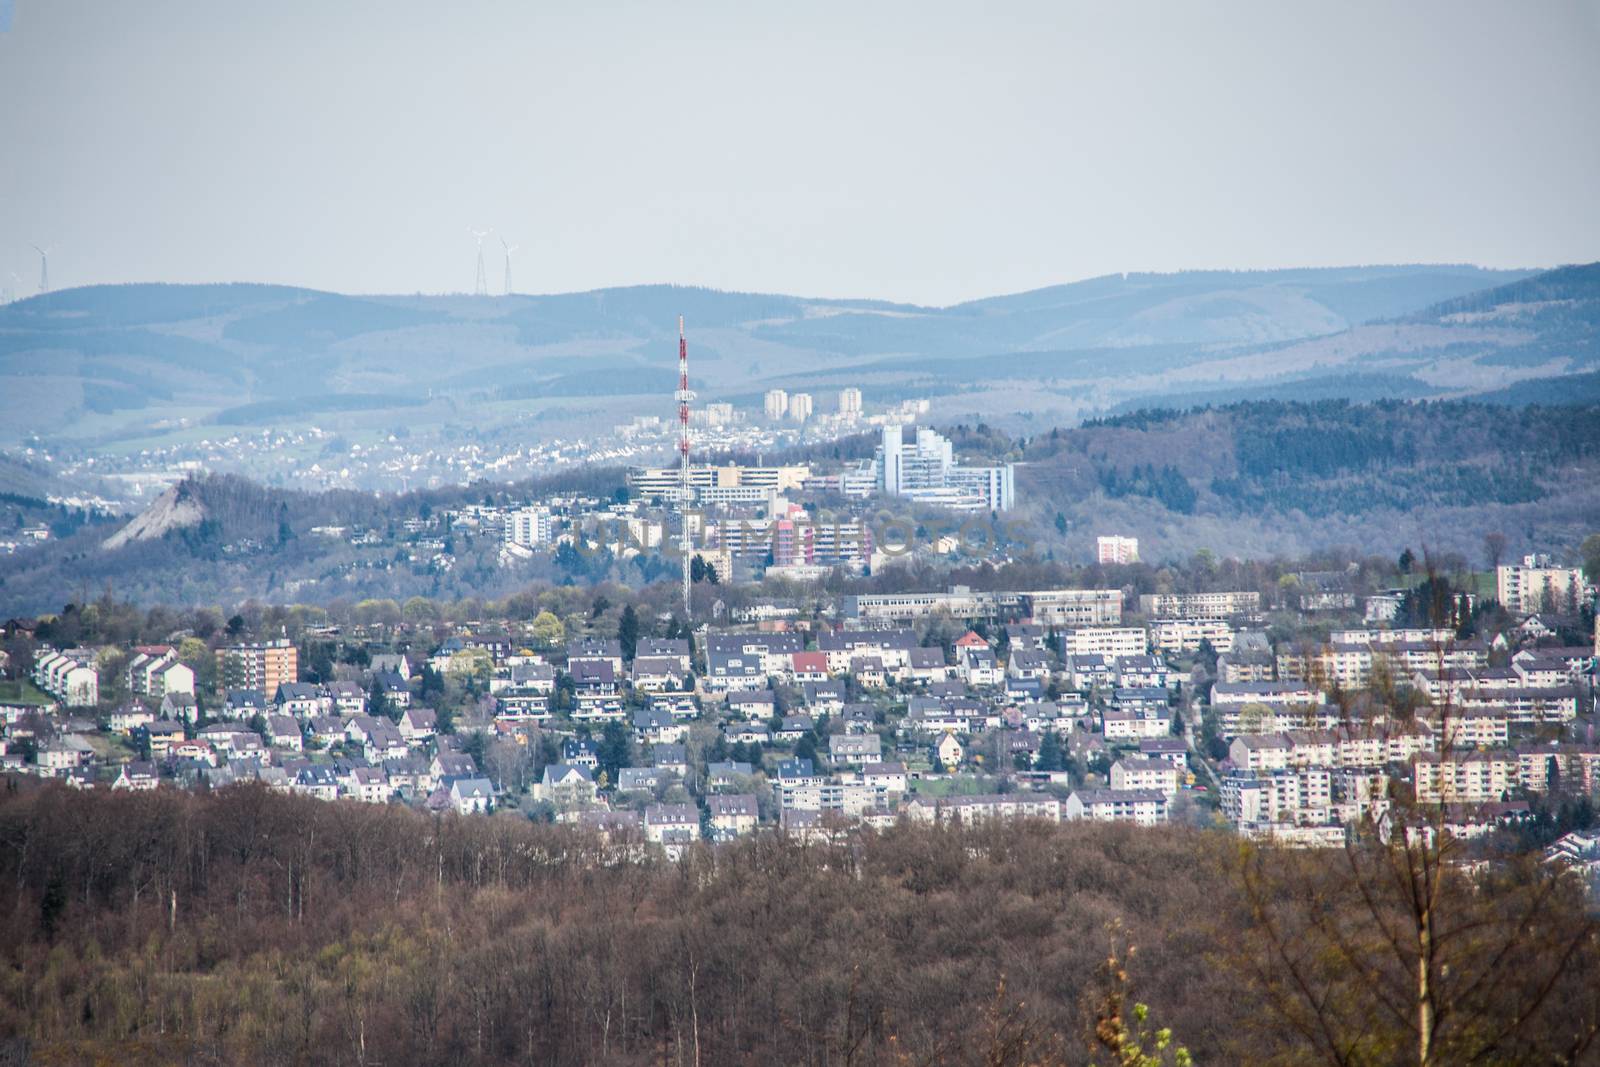 City of Siegen with university from the mountain top